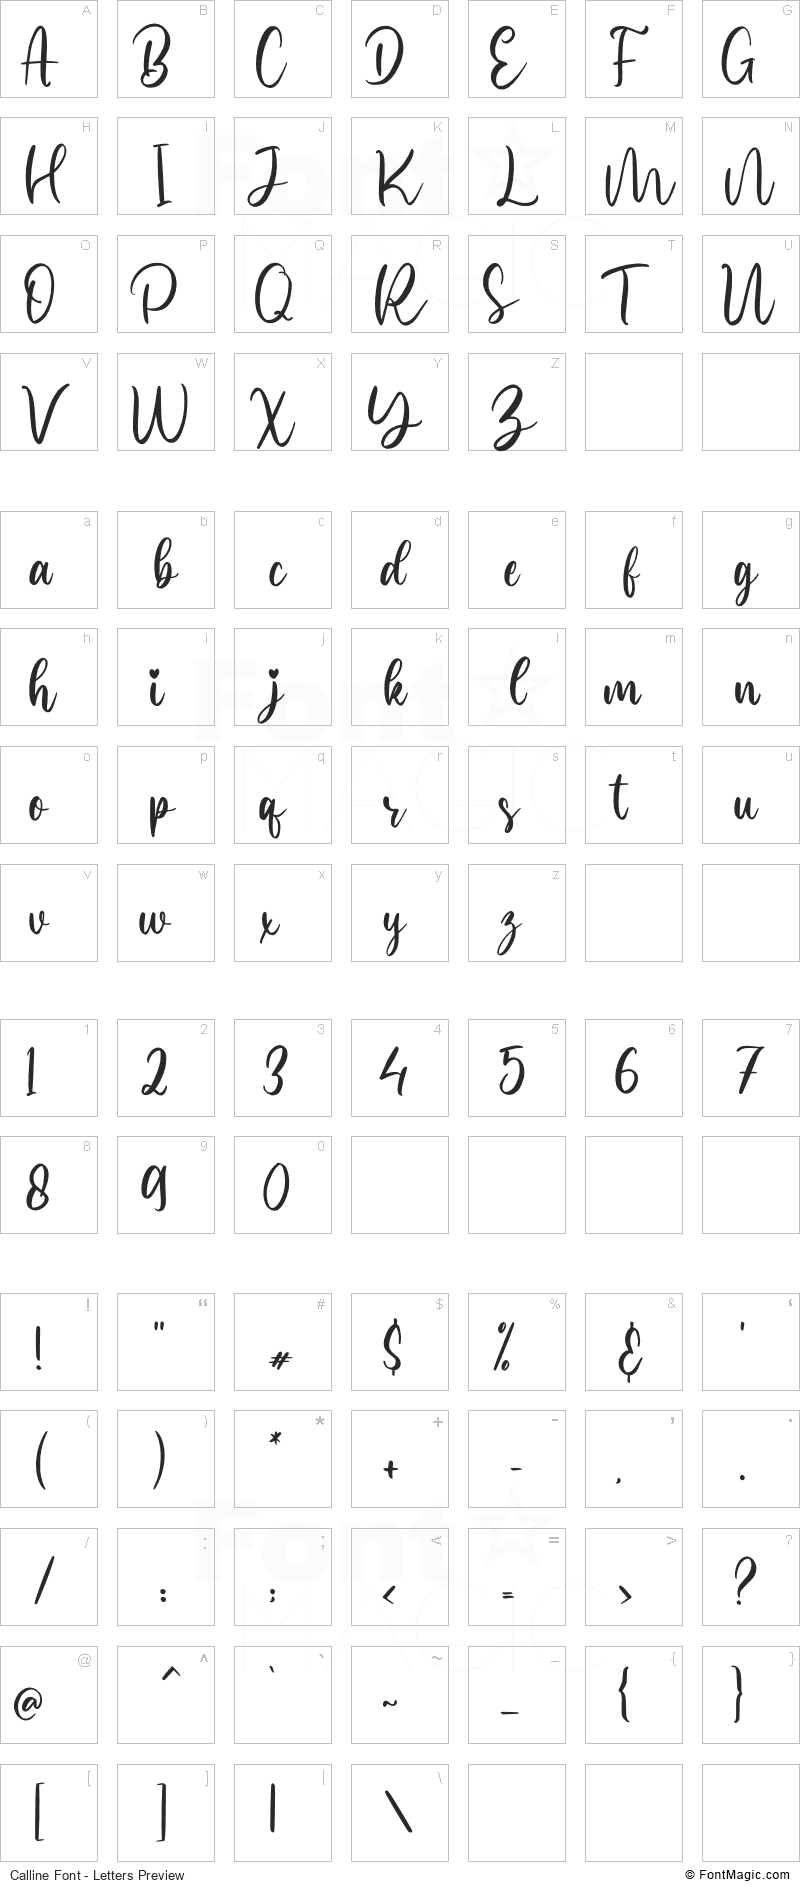 Calline Font - All Latters Preview Chart